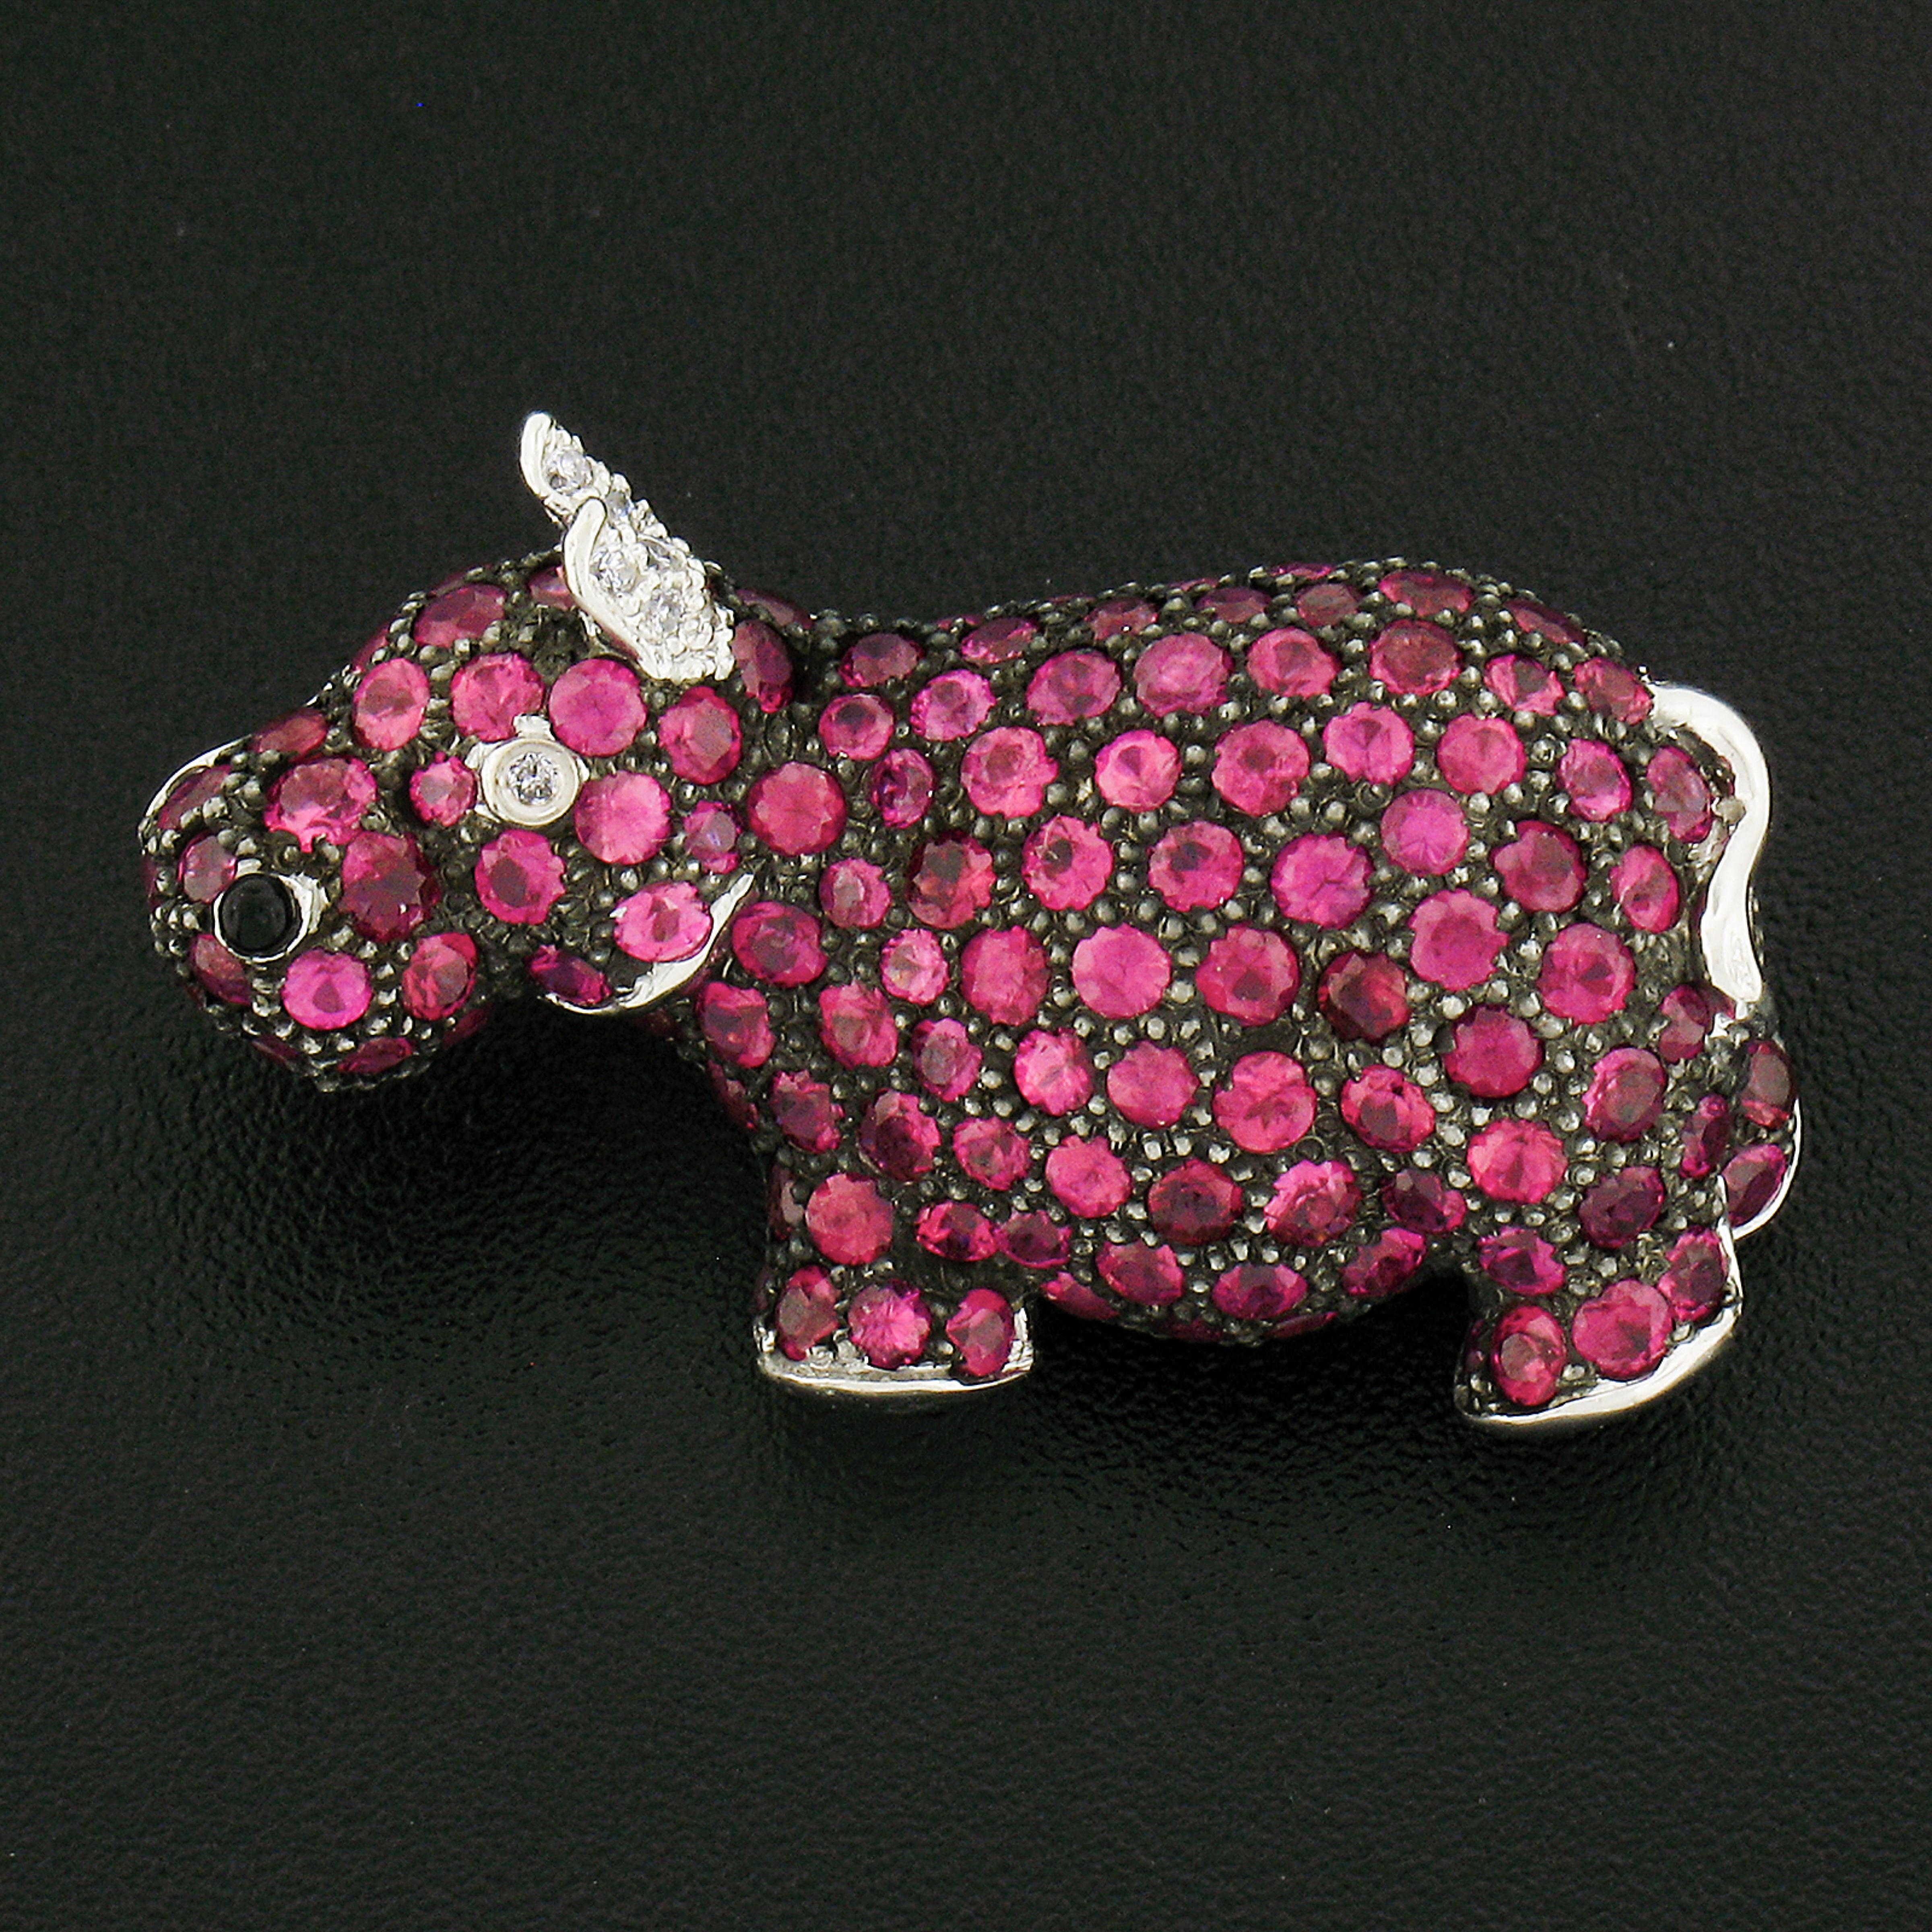 This super adorable hippopotamus brooch is crafted in solid 18k white gold with black rhodium throughout. The entire hippo design is neatly pave set with super fine quality purplish red rubies and is also adorned with a few diamonds at its ears and